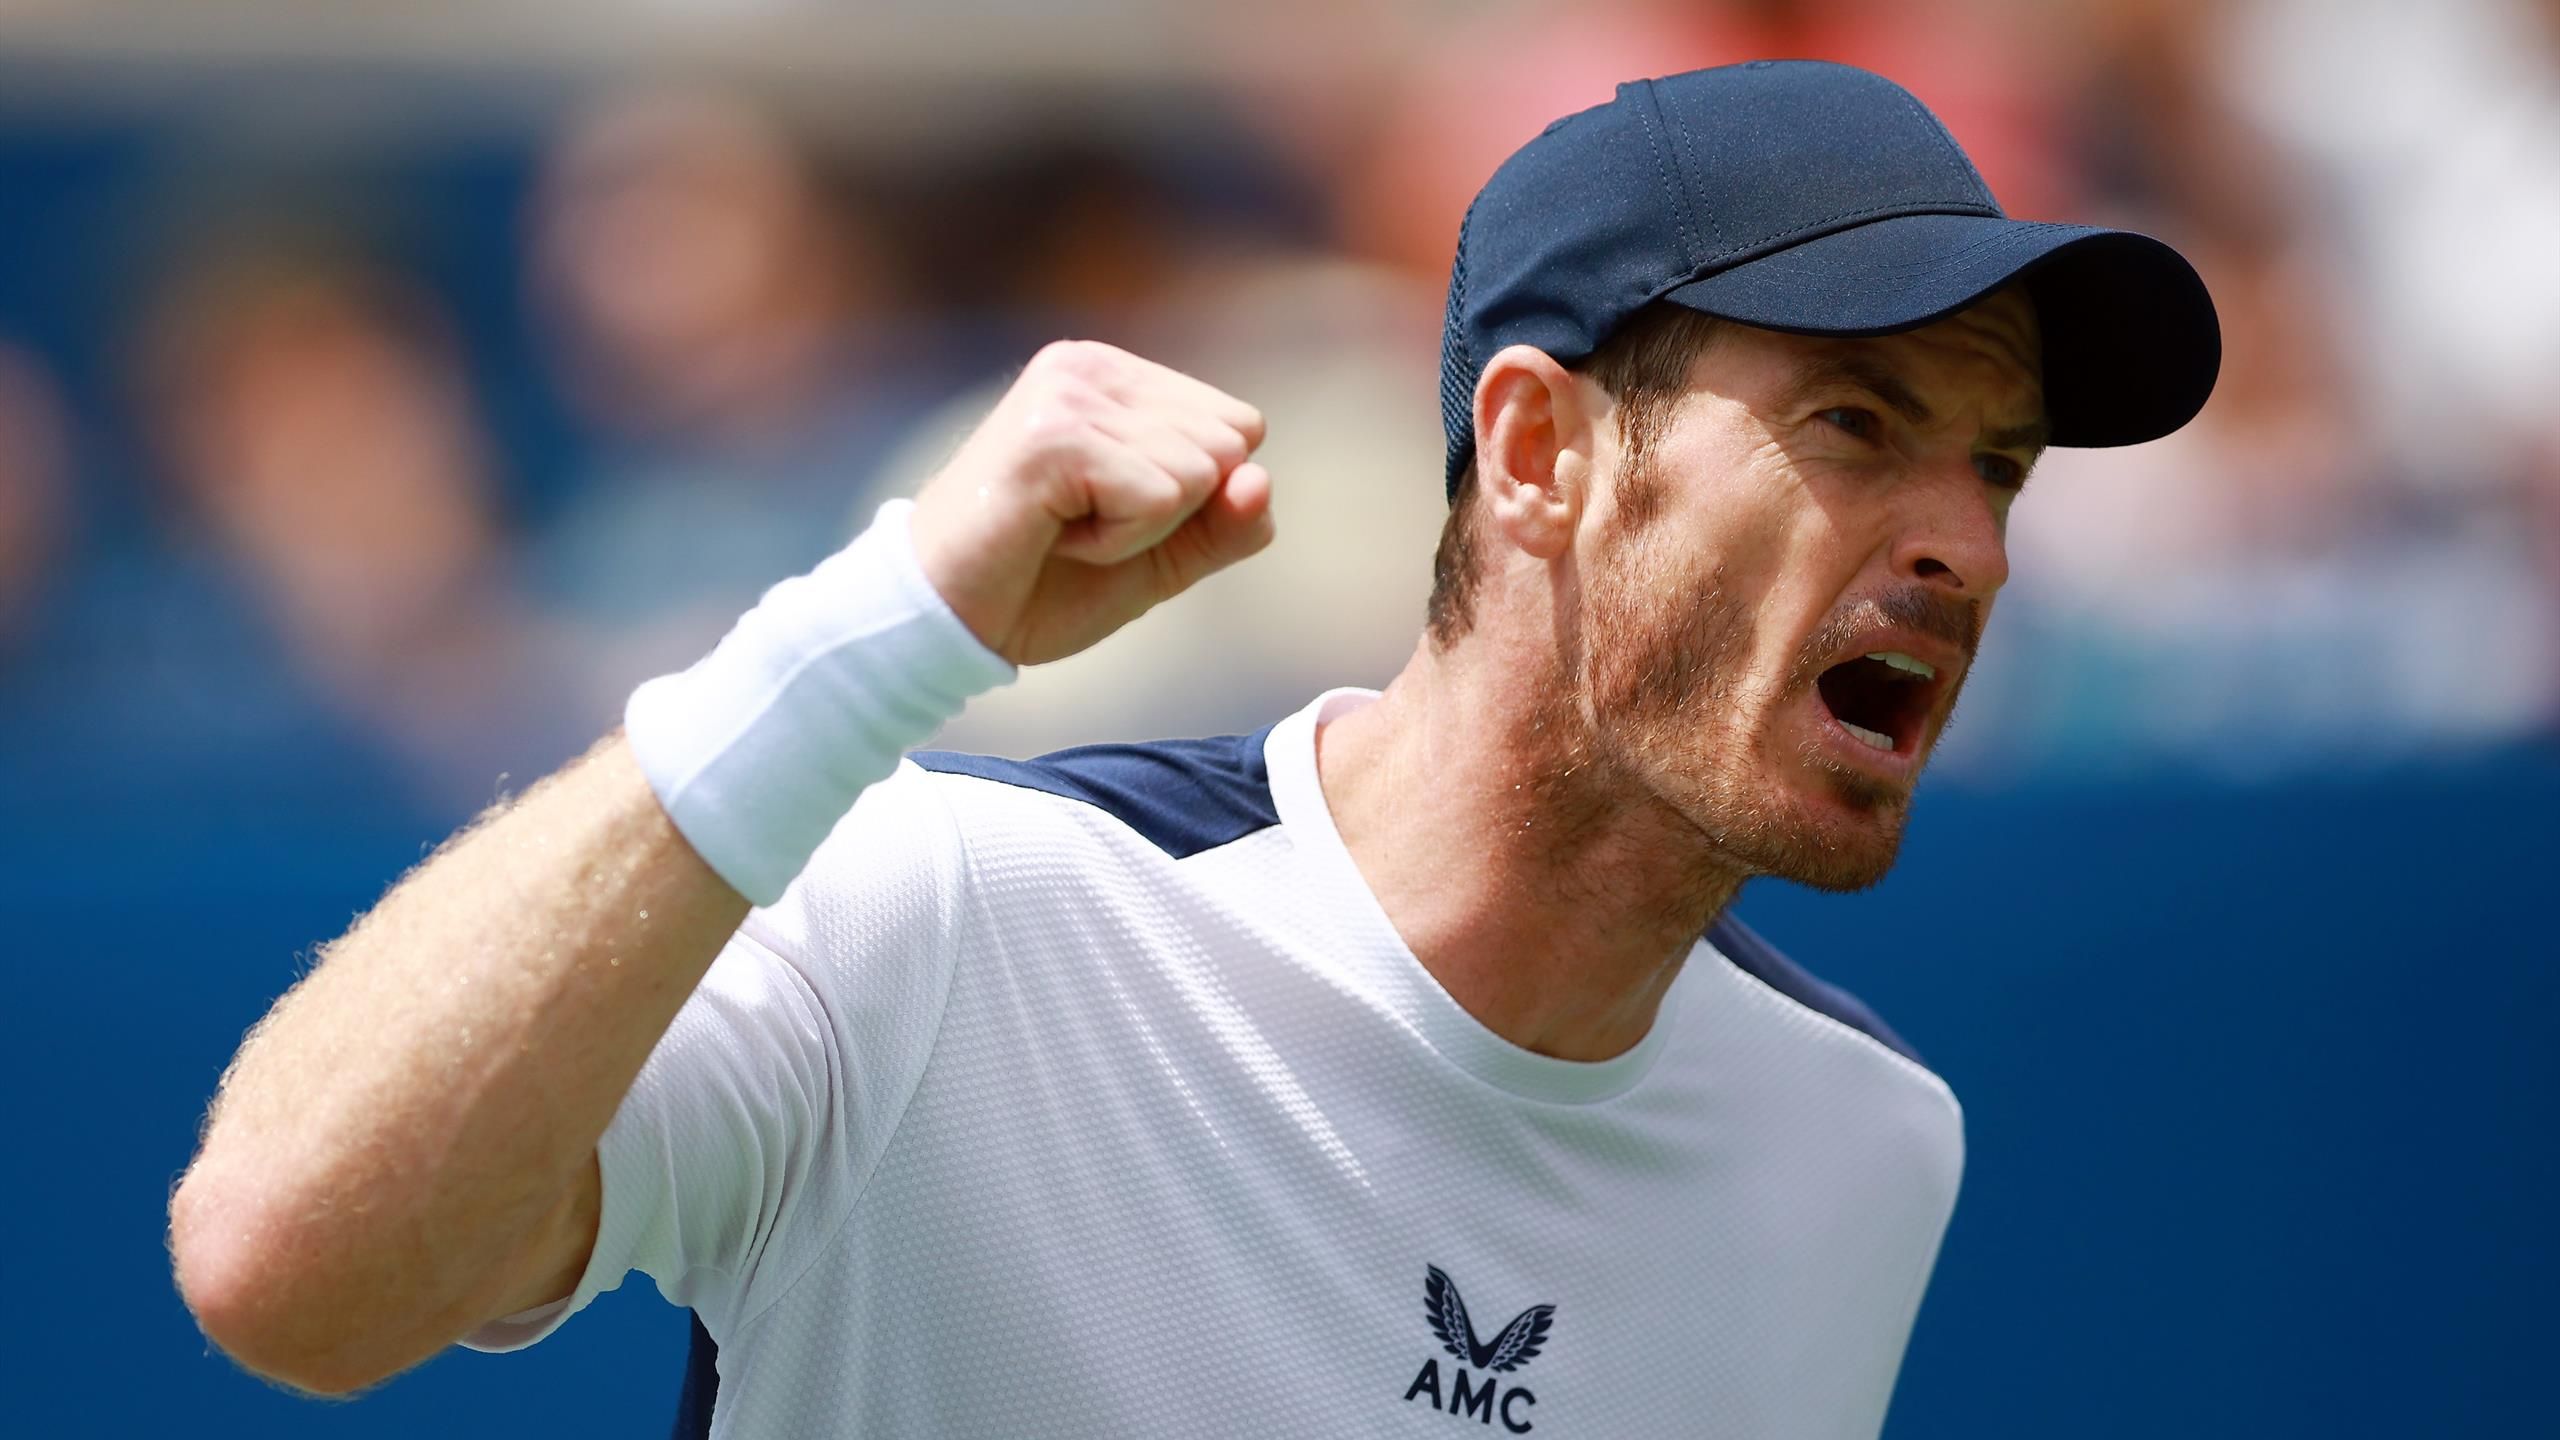 Andy Murray through to second round in Toronto after beating Lorenzo Sonego in straight sets